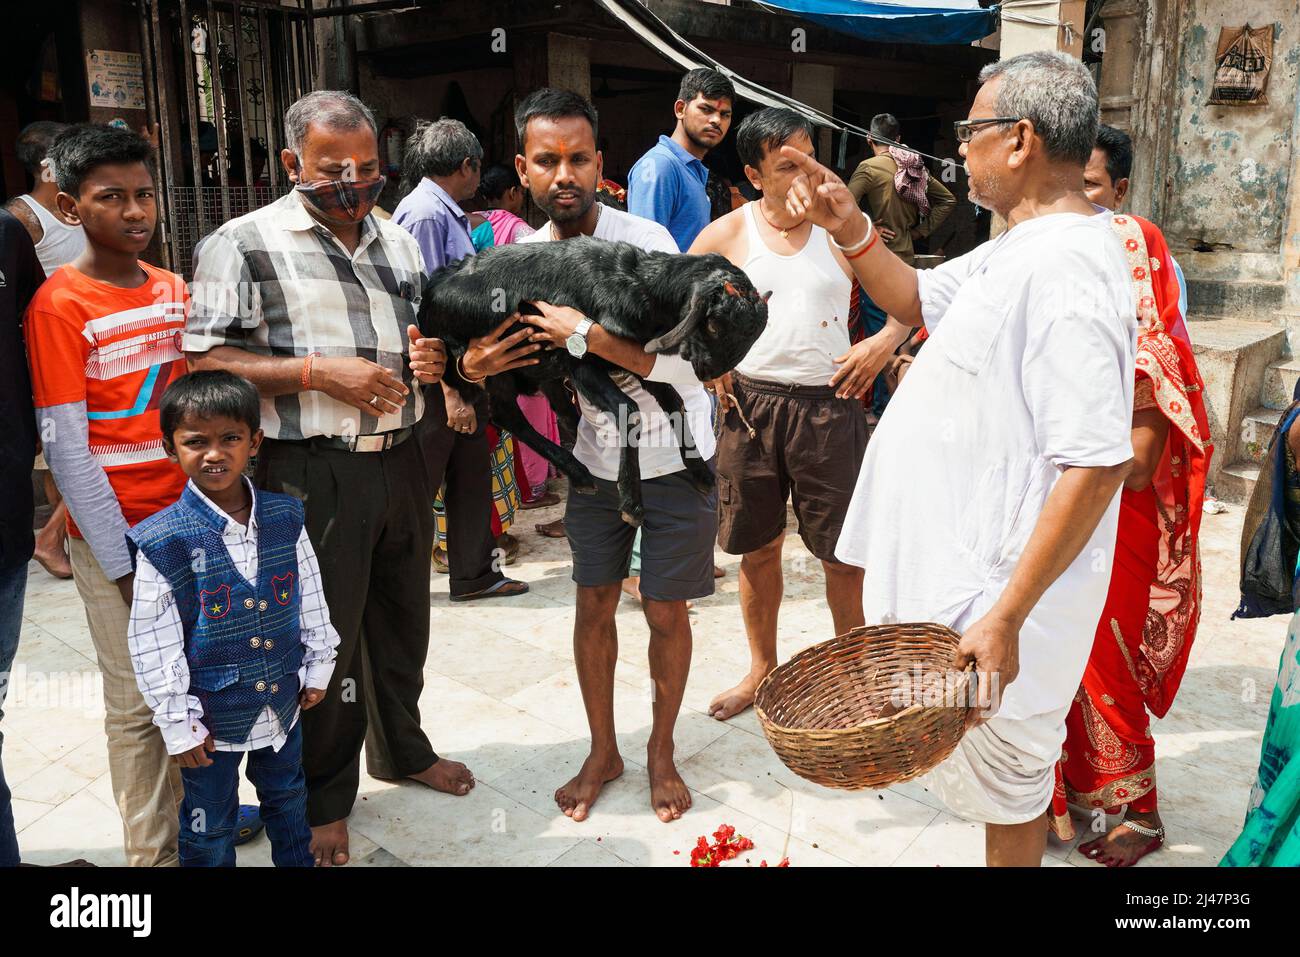 A sheep is offered as a sacrifice to be slaughtered in the Hindu Kalighat Kali Temple. Kolkata, India Stock Photo